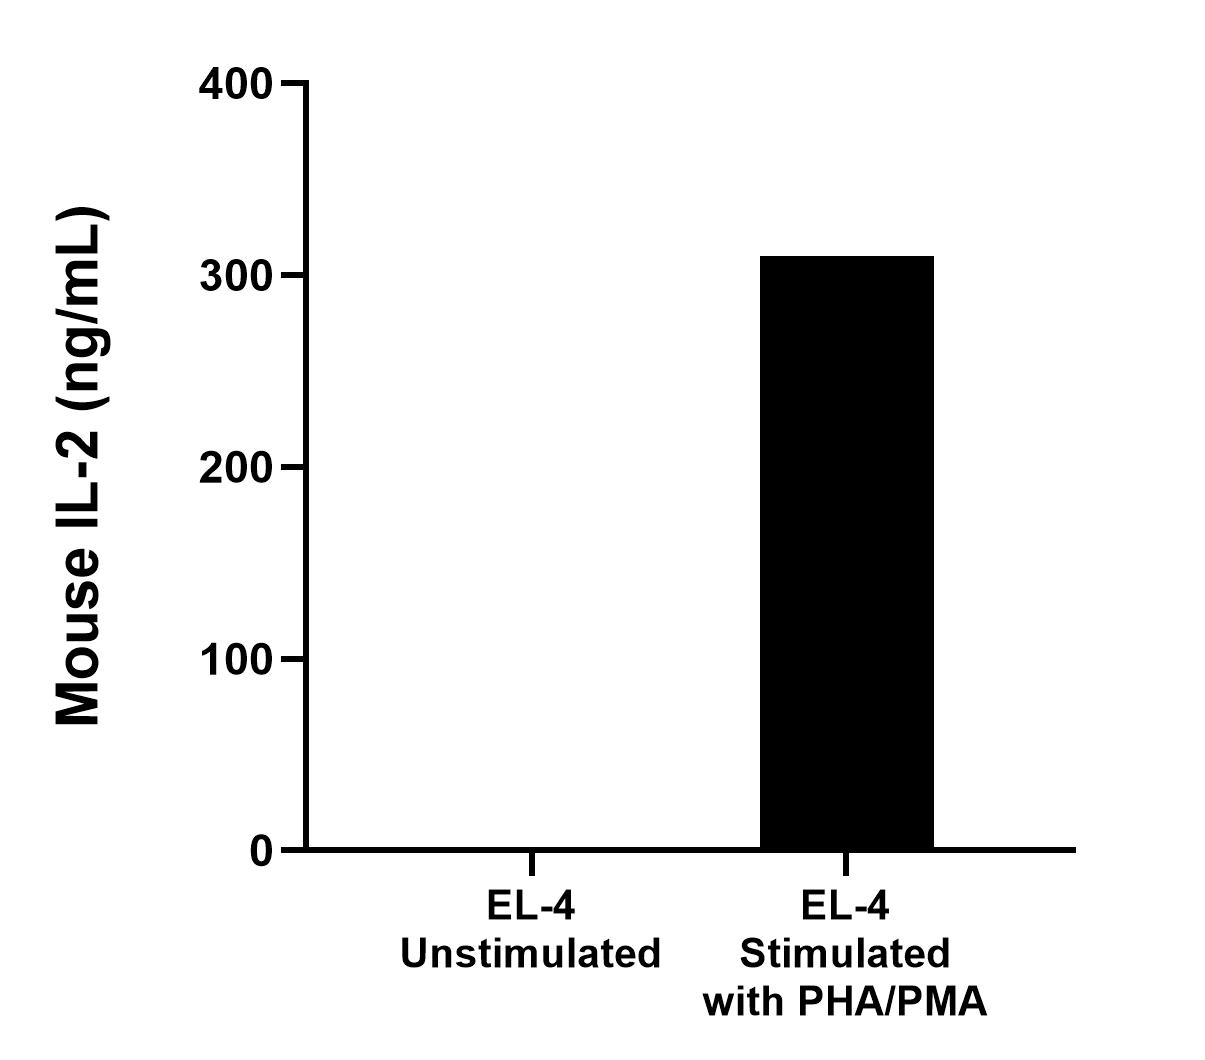 EL-4 mouse lymphoblast cells (1 x 10^6  cells/mL) were cultured for 3 days in DMEM supplemented with 10% fetal bovine serum and stimulated with 10 μg/mL PHA and 10 ng/mL PMA. The mean mouse IL-2 concentration was determined to be 16.1 pg/mL in unstimulated EL-4, 309.9 ng/mL in PHA and PMA stimulated EL-4 supernatant. 